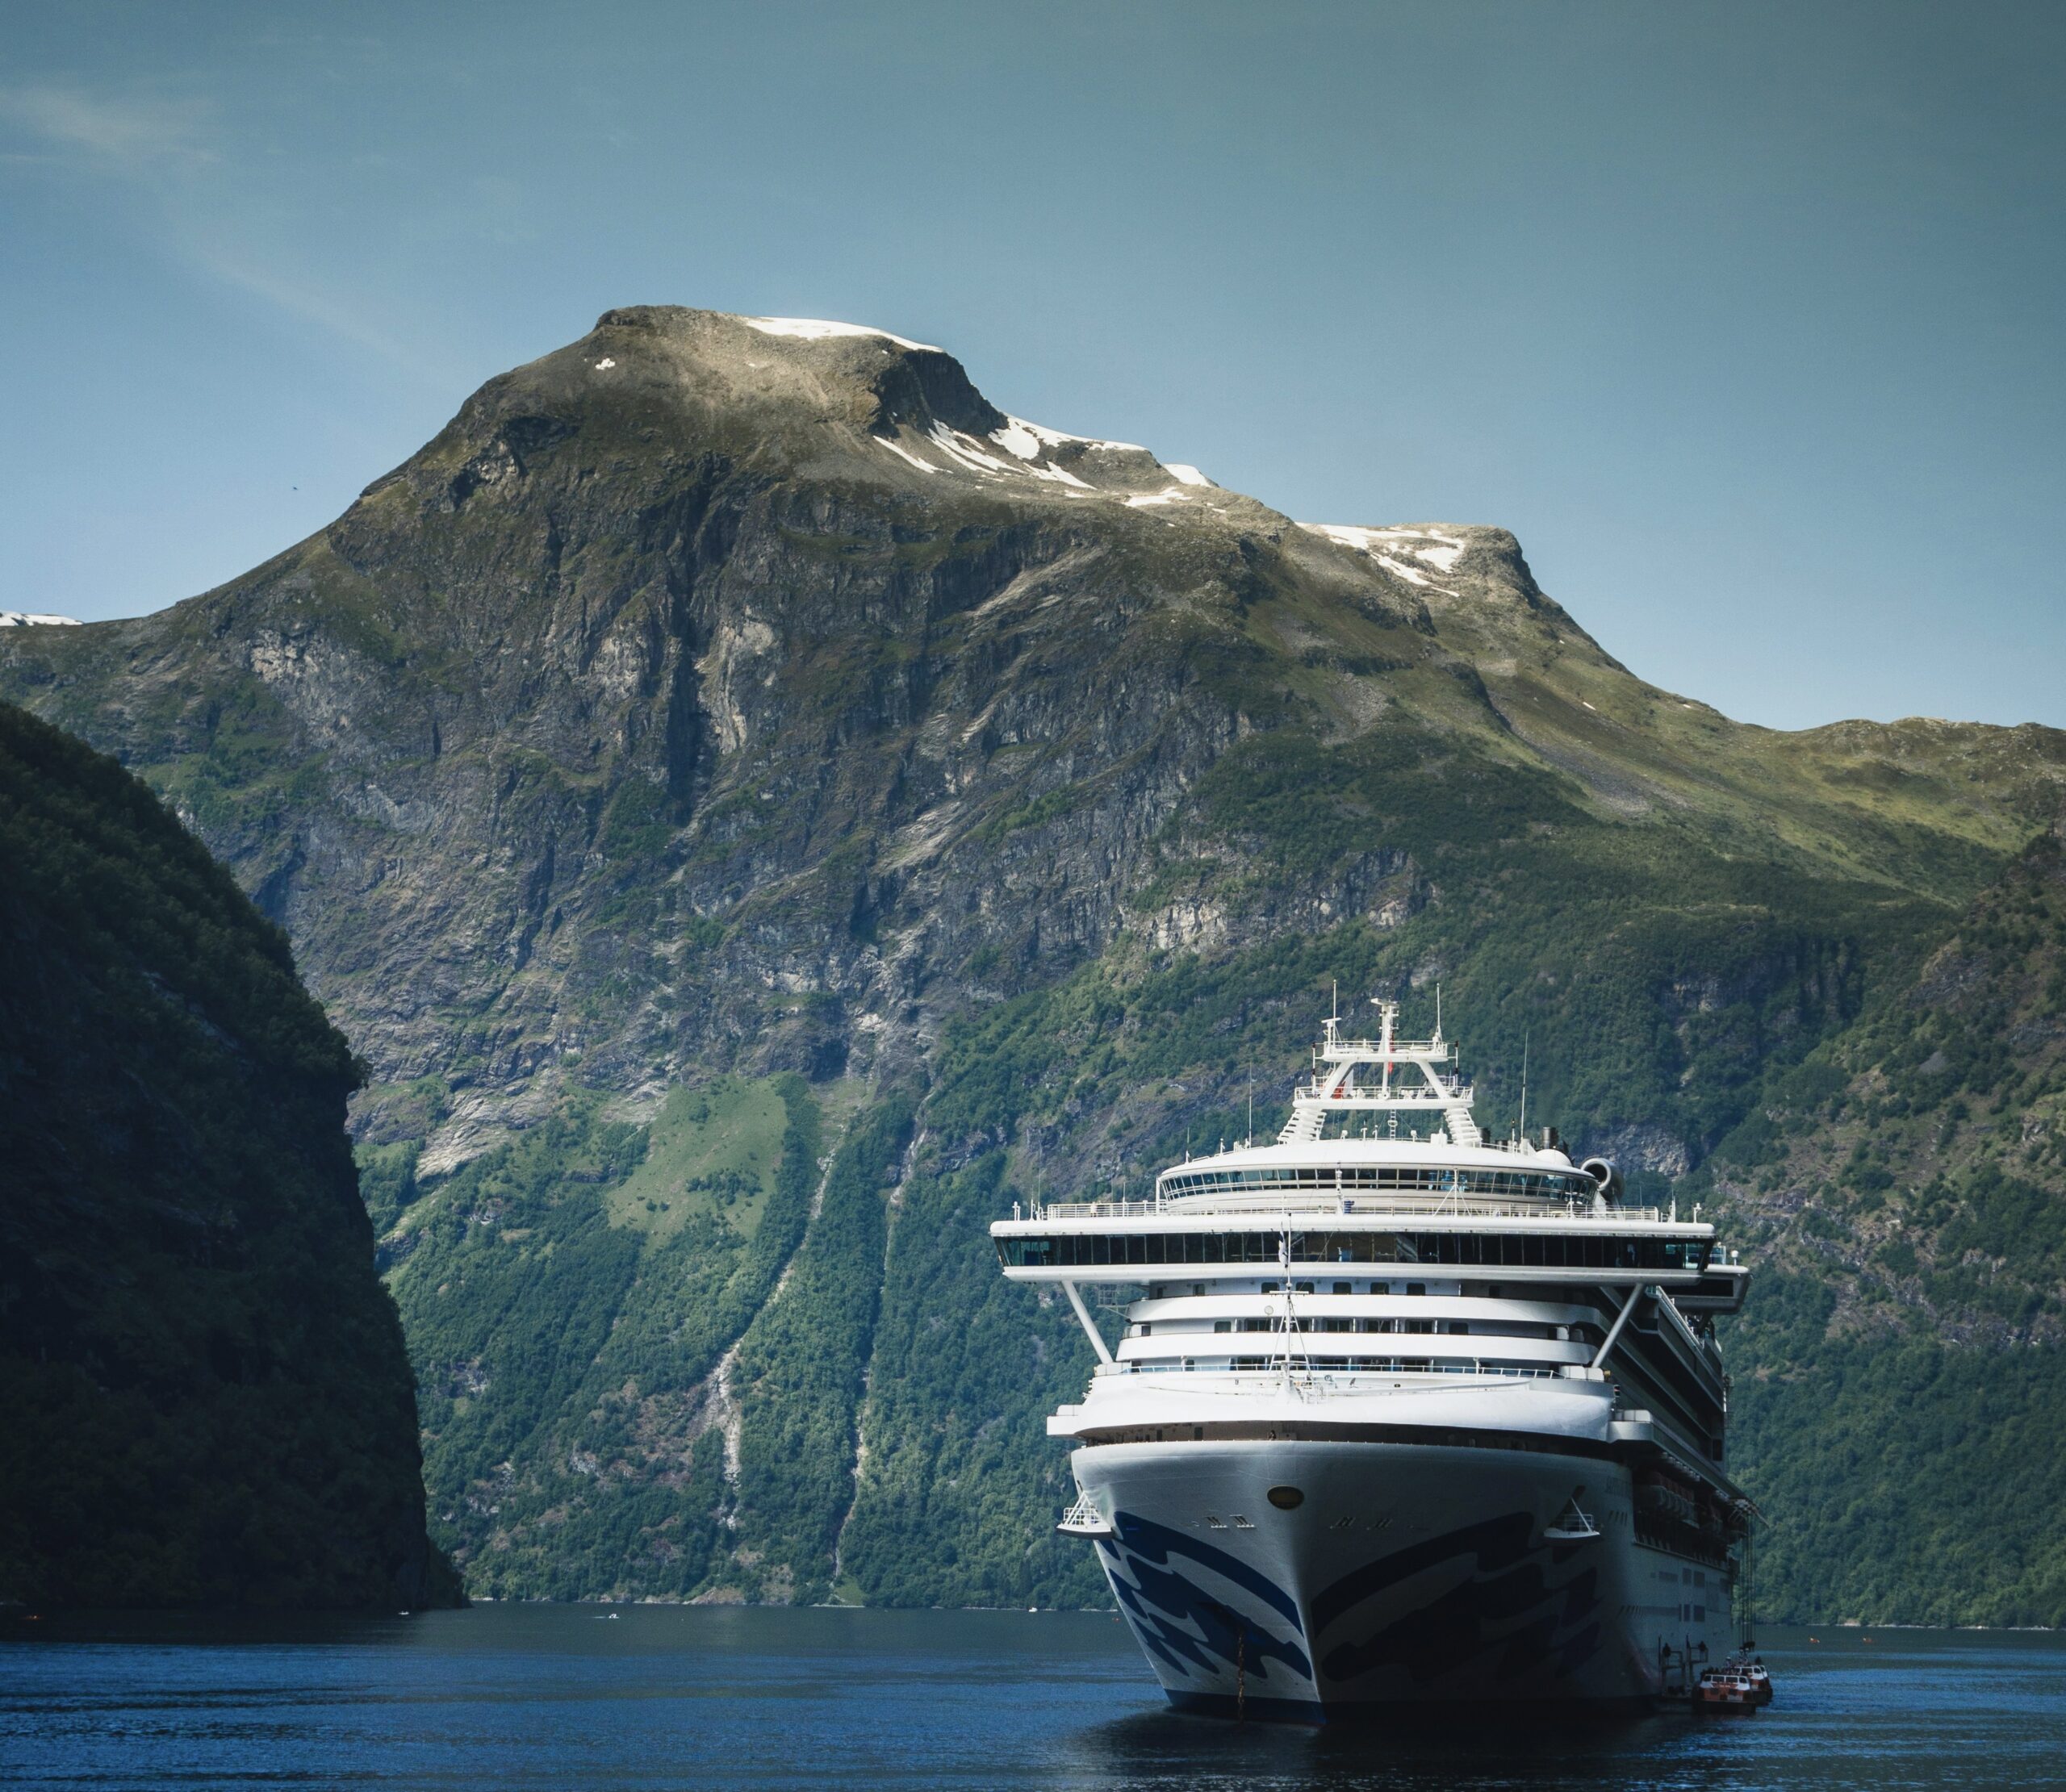 Life at Sea cruises have received negative feedback due to the last minute cancellation of the three year long cruise. 
Pictured: a cruise ship in front of a grand mountain on a bright blue day 